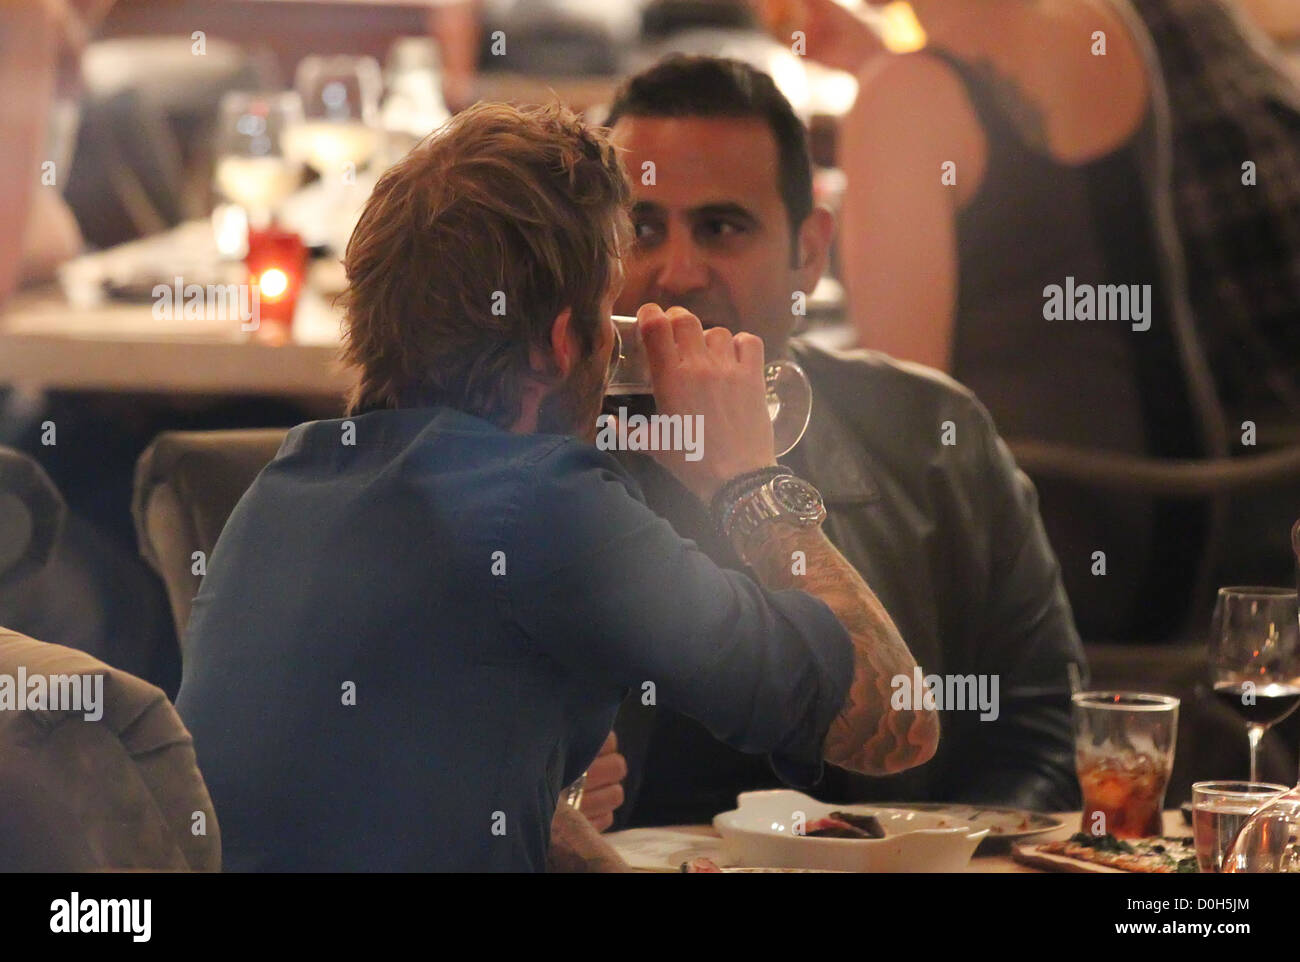 David Beckham having dinner with Iranian-American entrepreneur Sam Nazarian at Cleo restaurant in Hollywood Los Angeles, Stock Photo